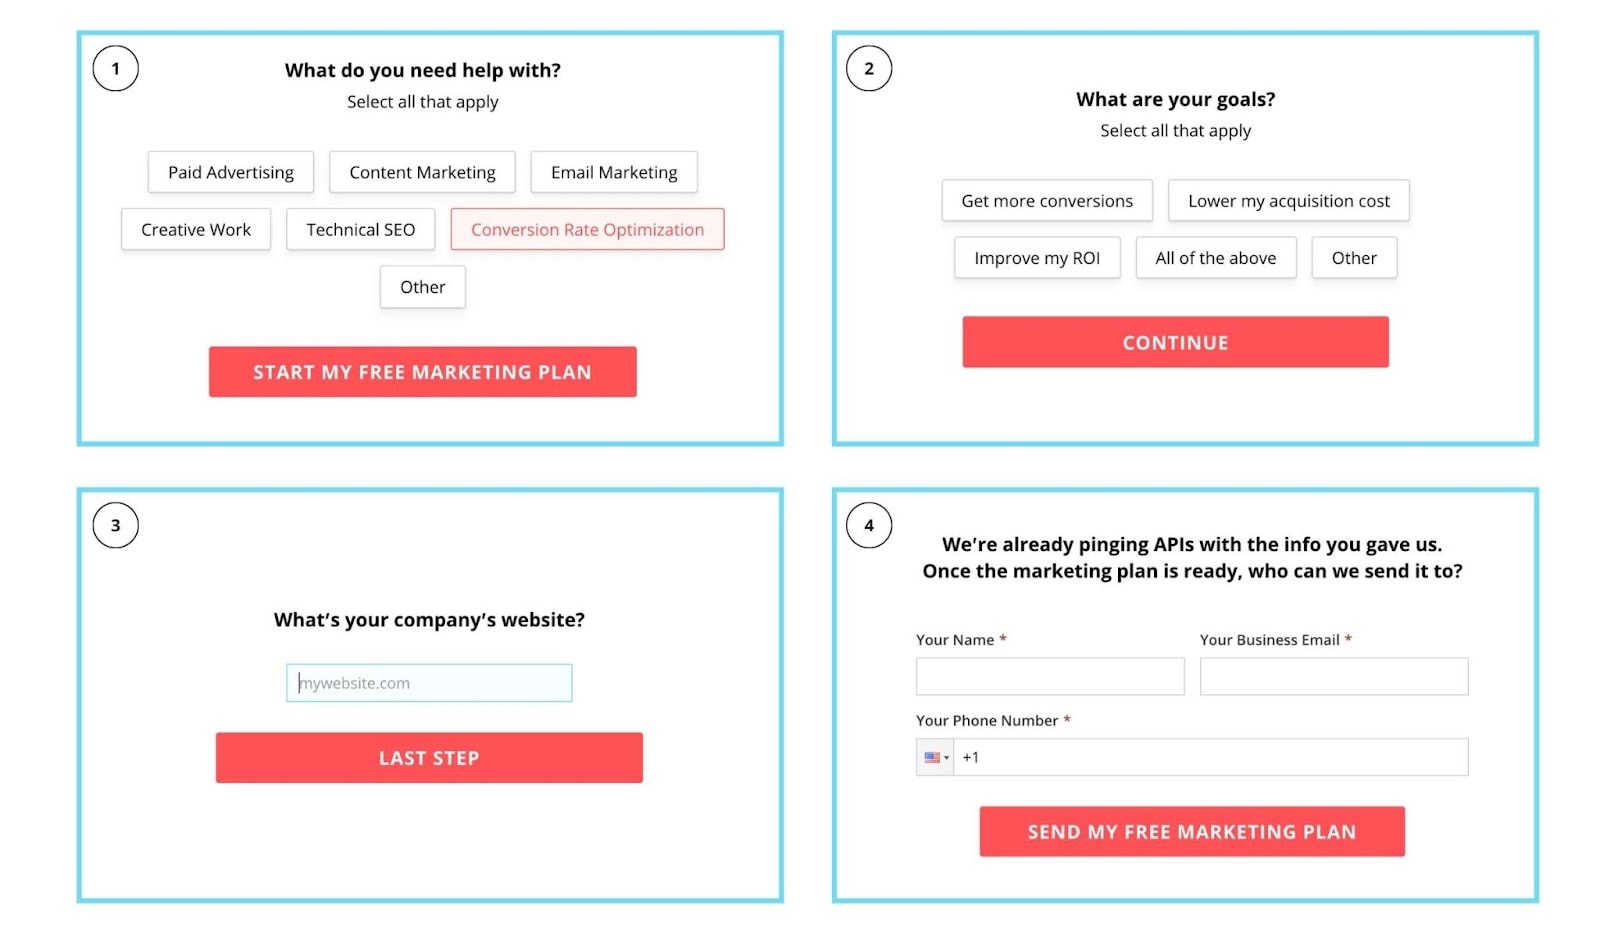 How to Do Landing Page Testing Right